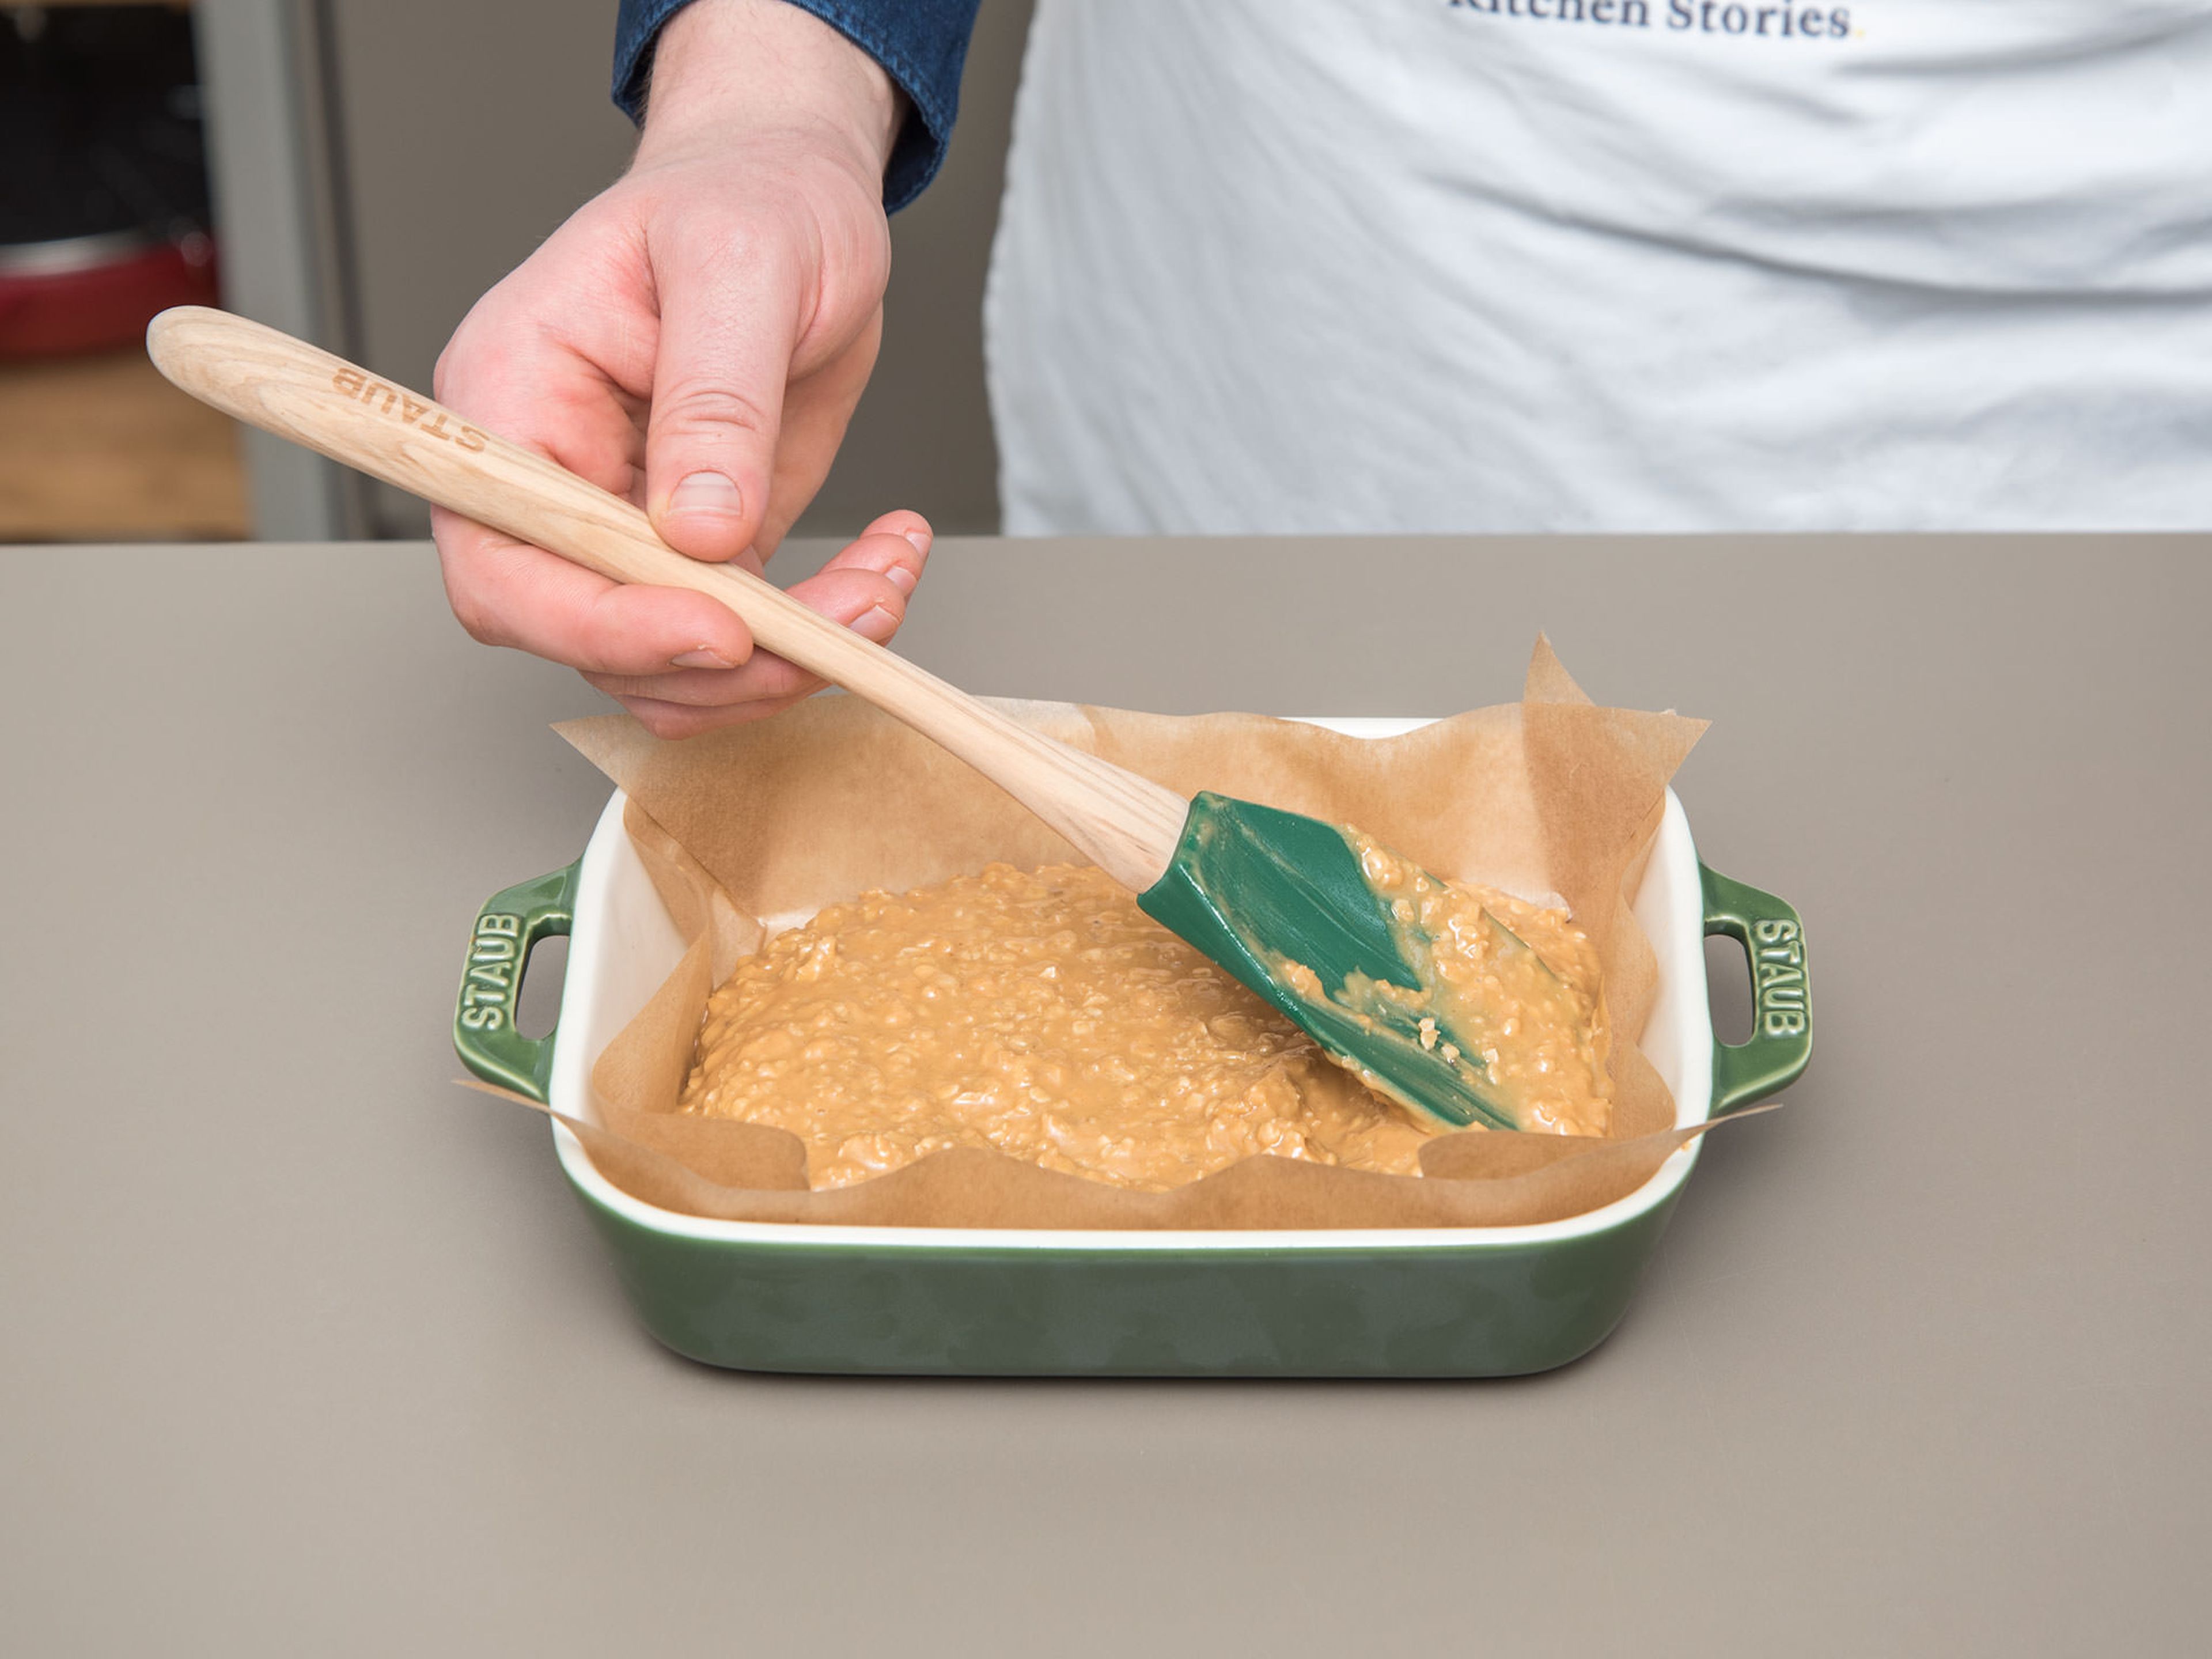 Line the baking dish with parchment paper and spread the peanut butter oat mixture evenly into the bottom of the dish with the rubber spatula. Press firmly. Freeze for approx. 20 min.